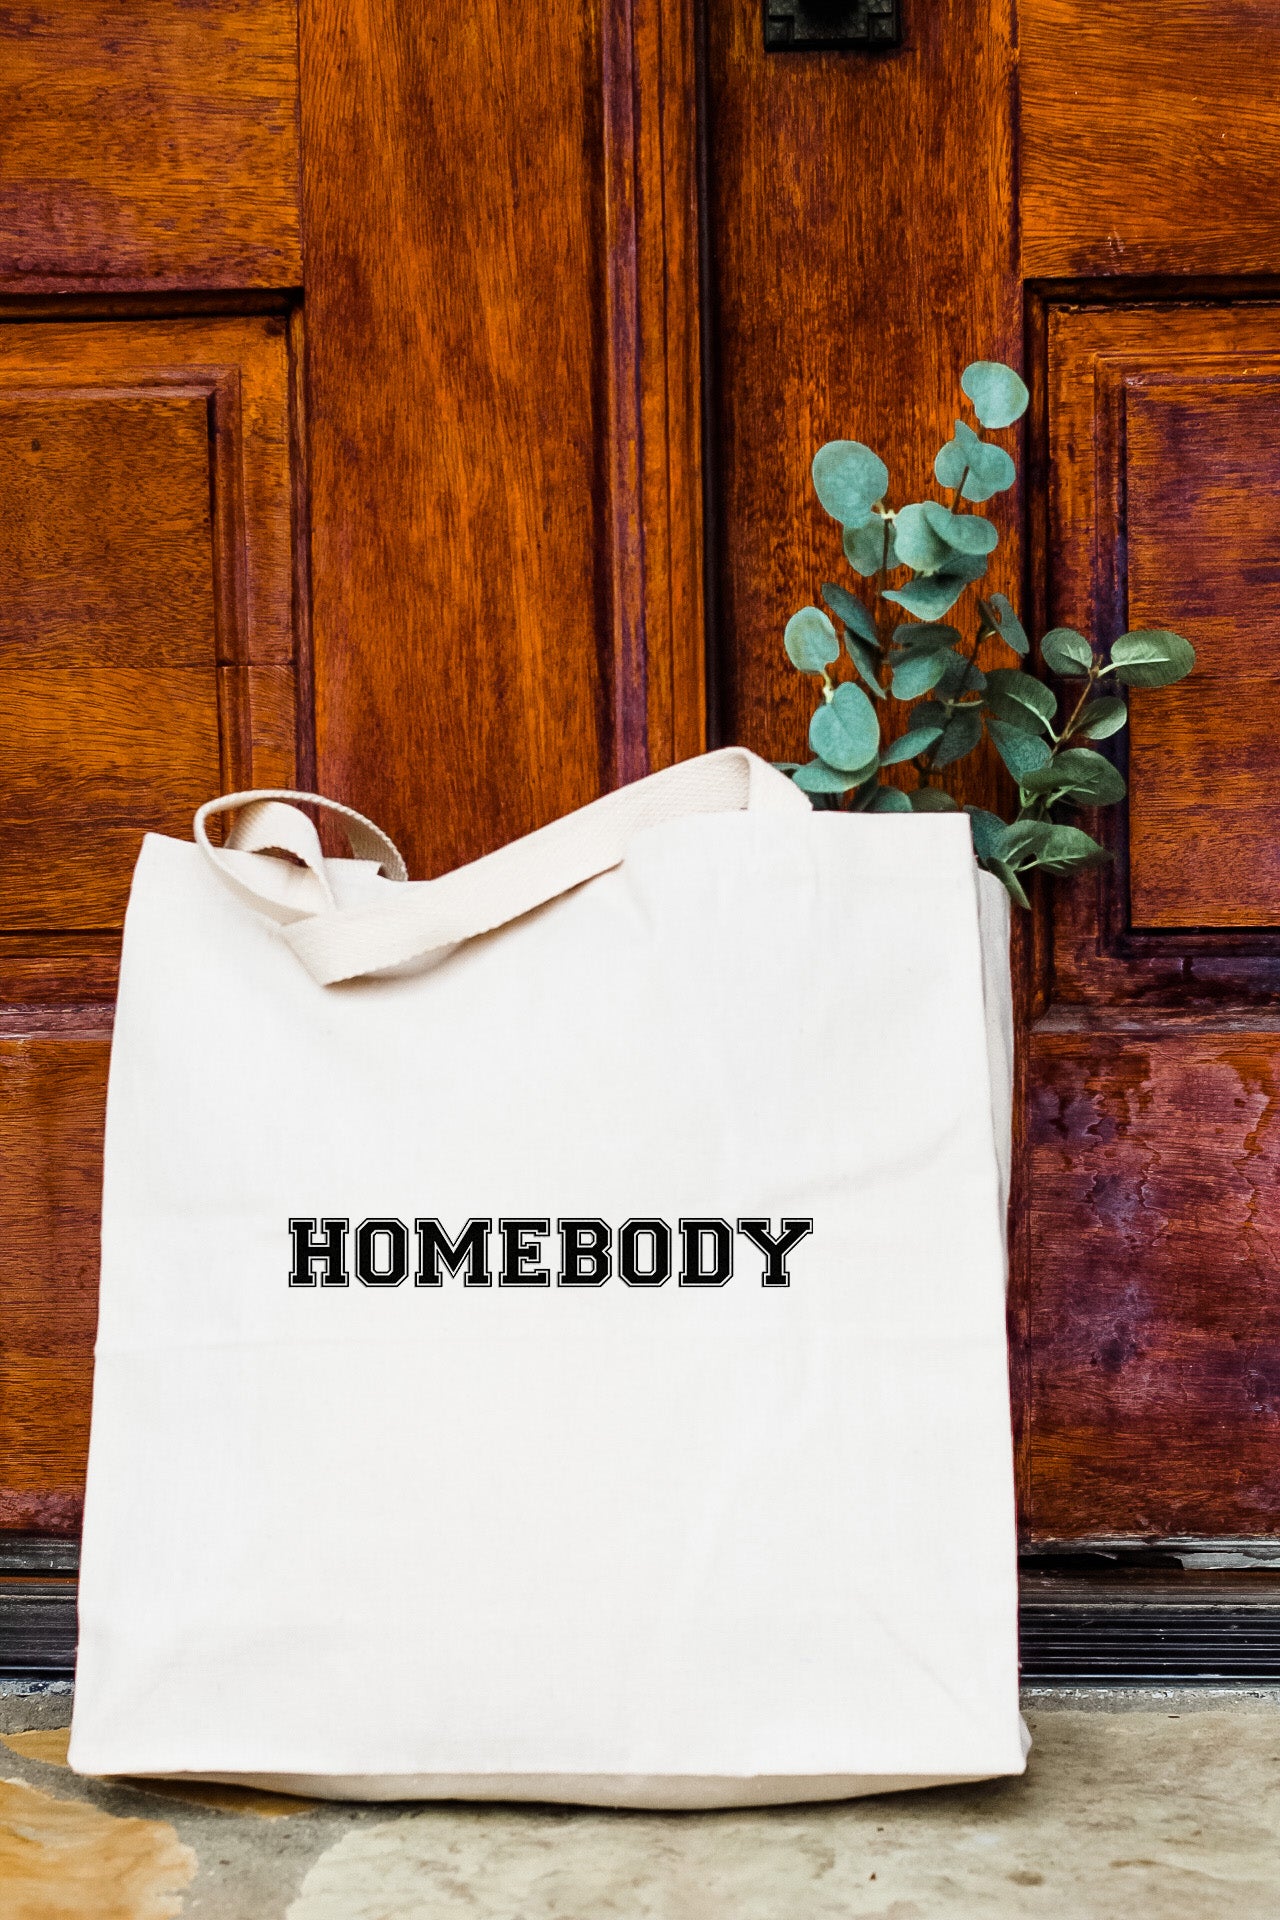 Homebody - Feel Good Collection - Tote Bag - MoonlightMakers